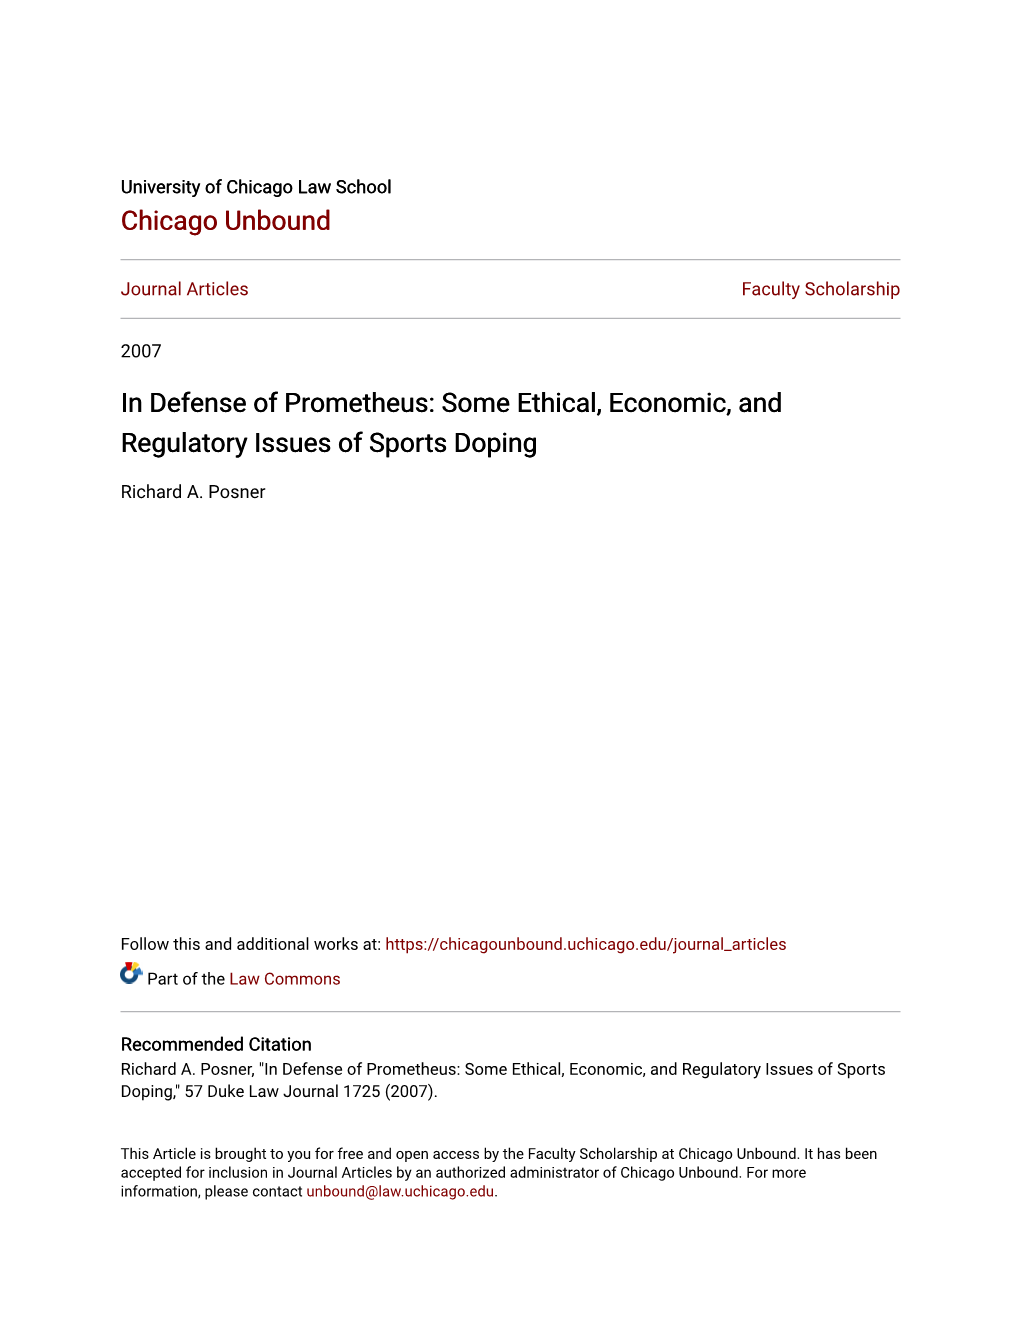 Some Ethical, Economic, and Regulatory Issues of Sports Doping